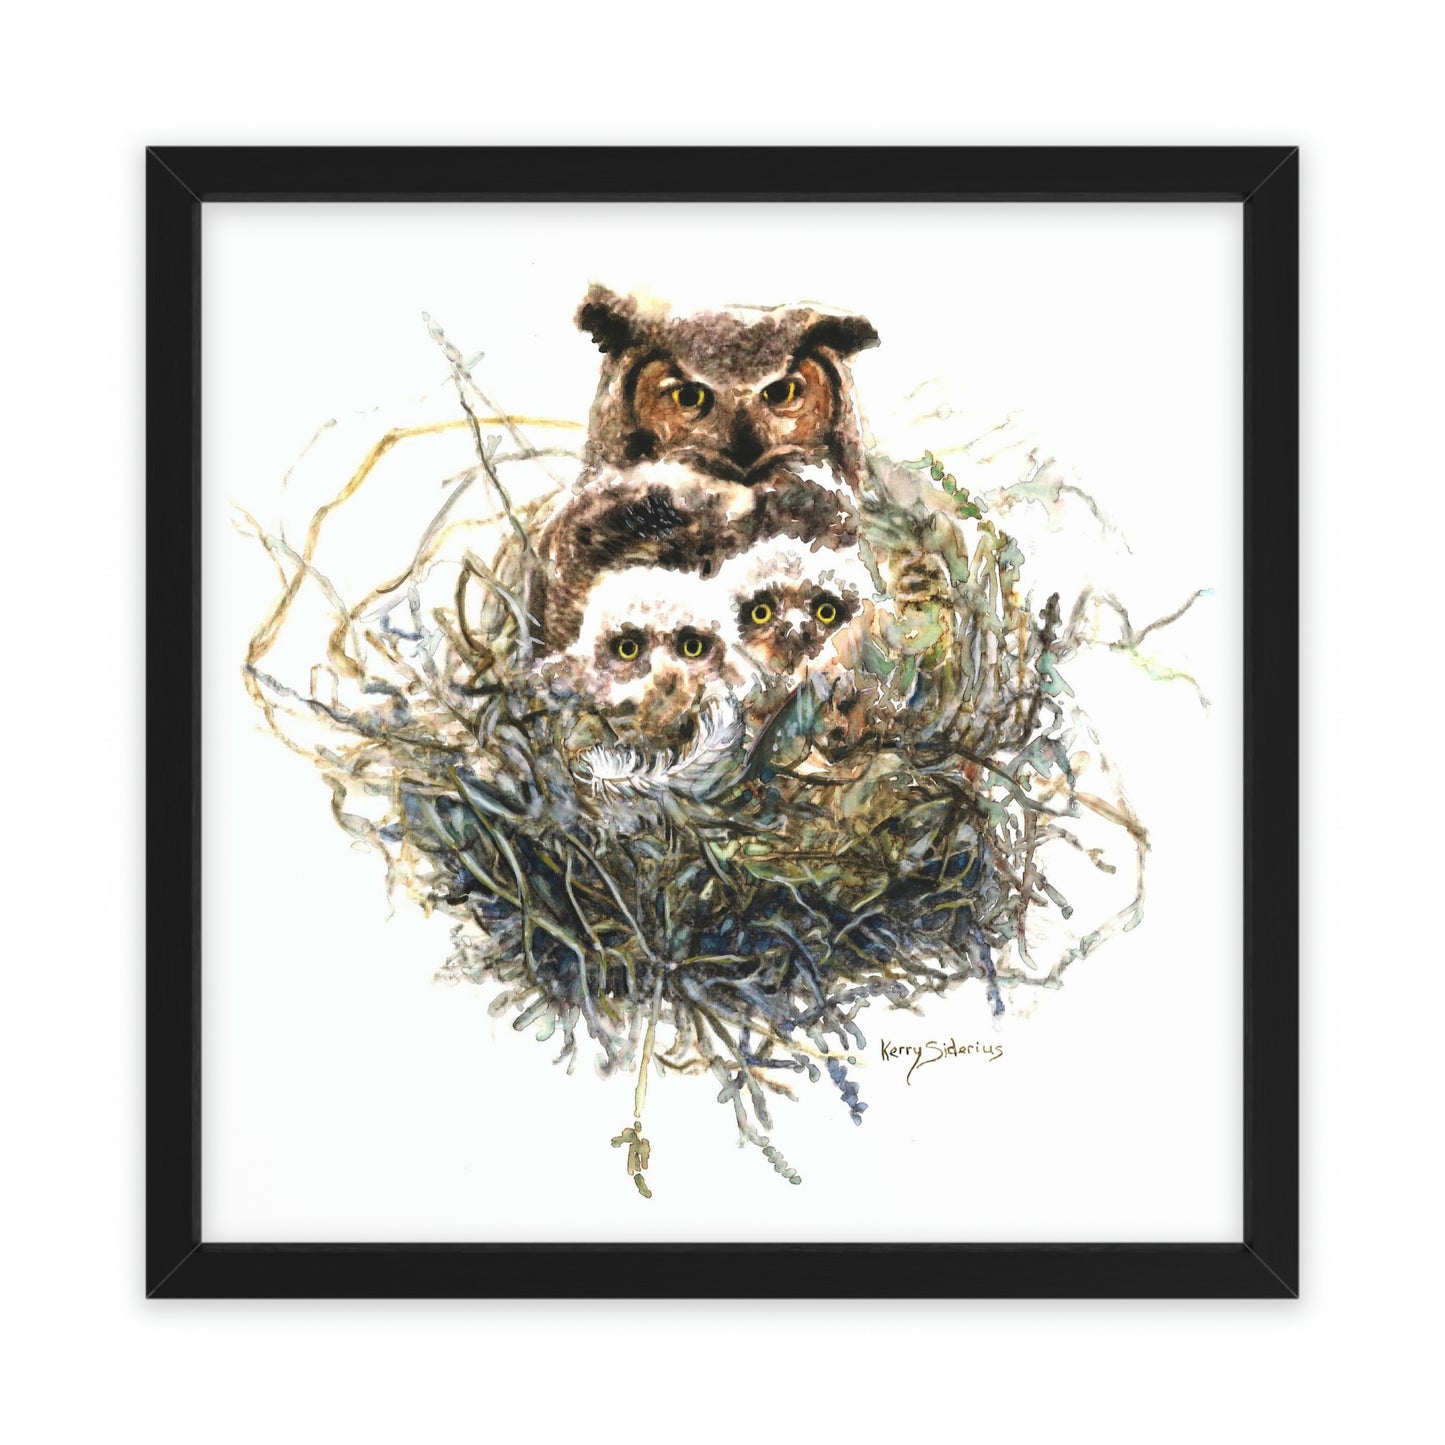 "Baby Owls at Rio Vista" Wood-Framed Poster - Kerry Siderius Art 